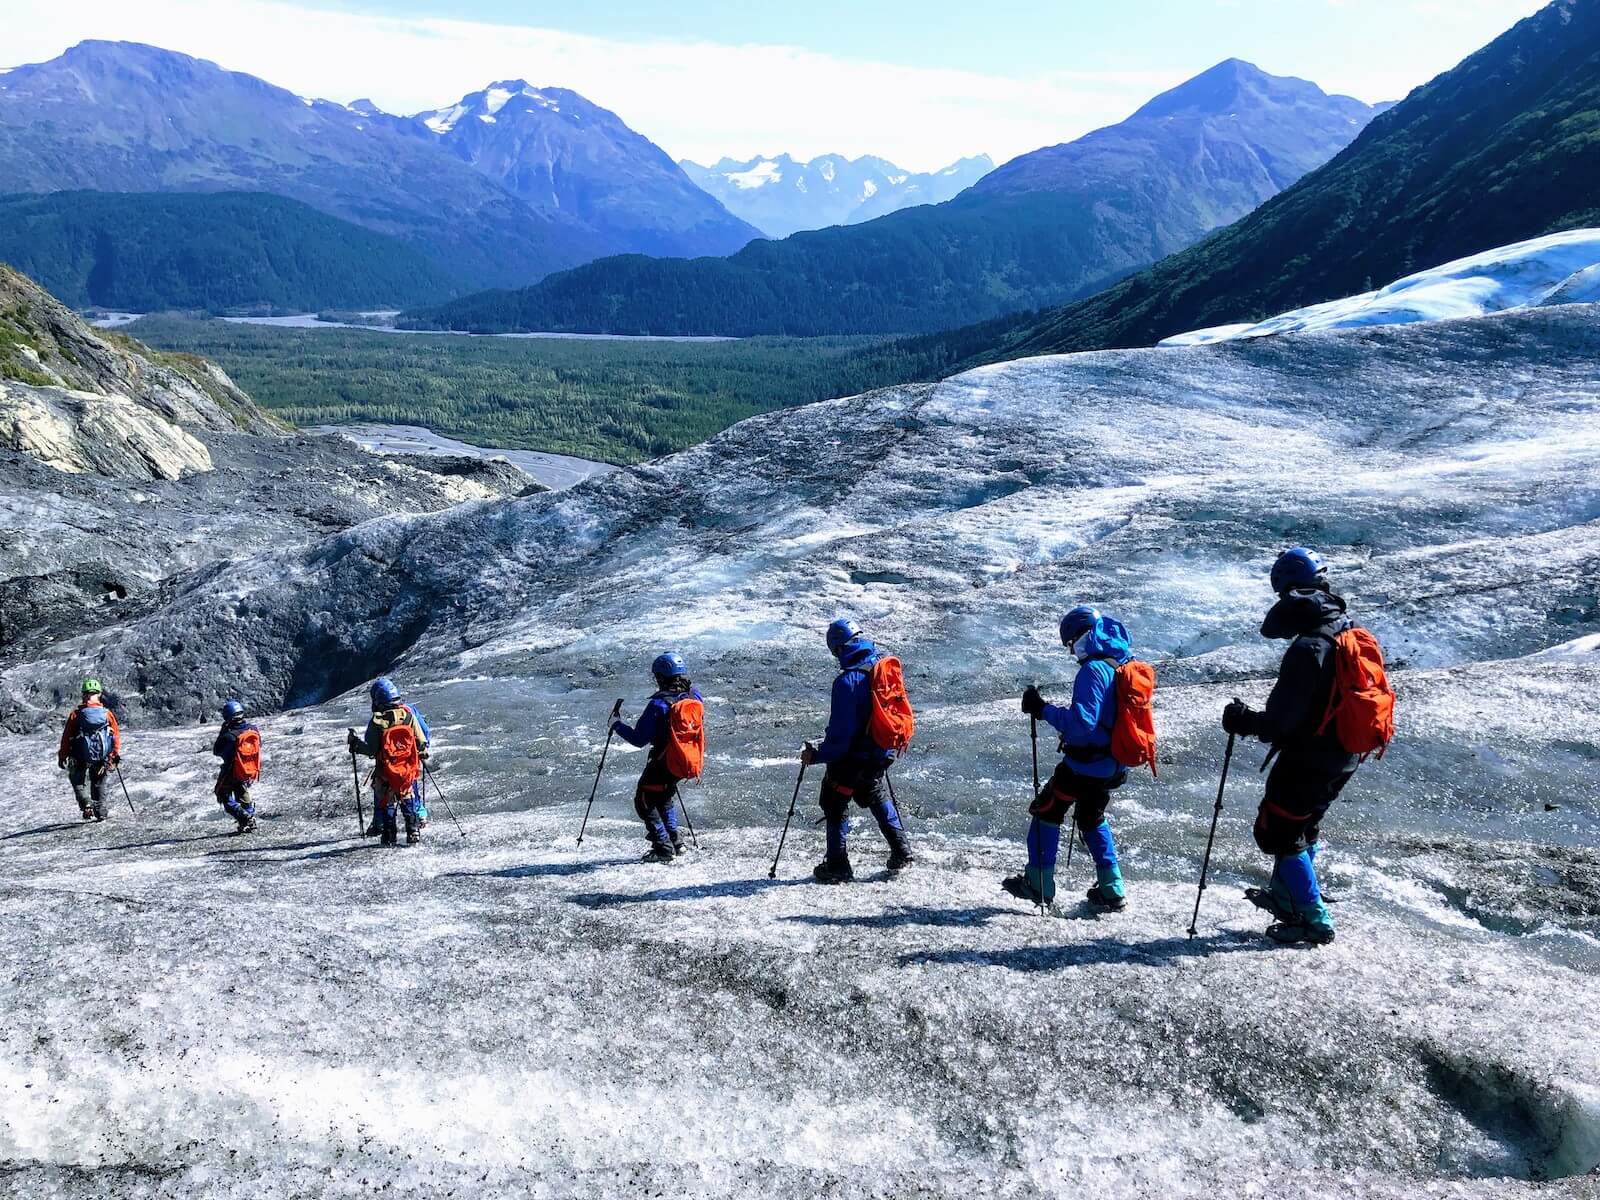 What Do You Need to Hike Glaciers?